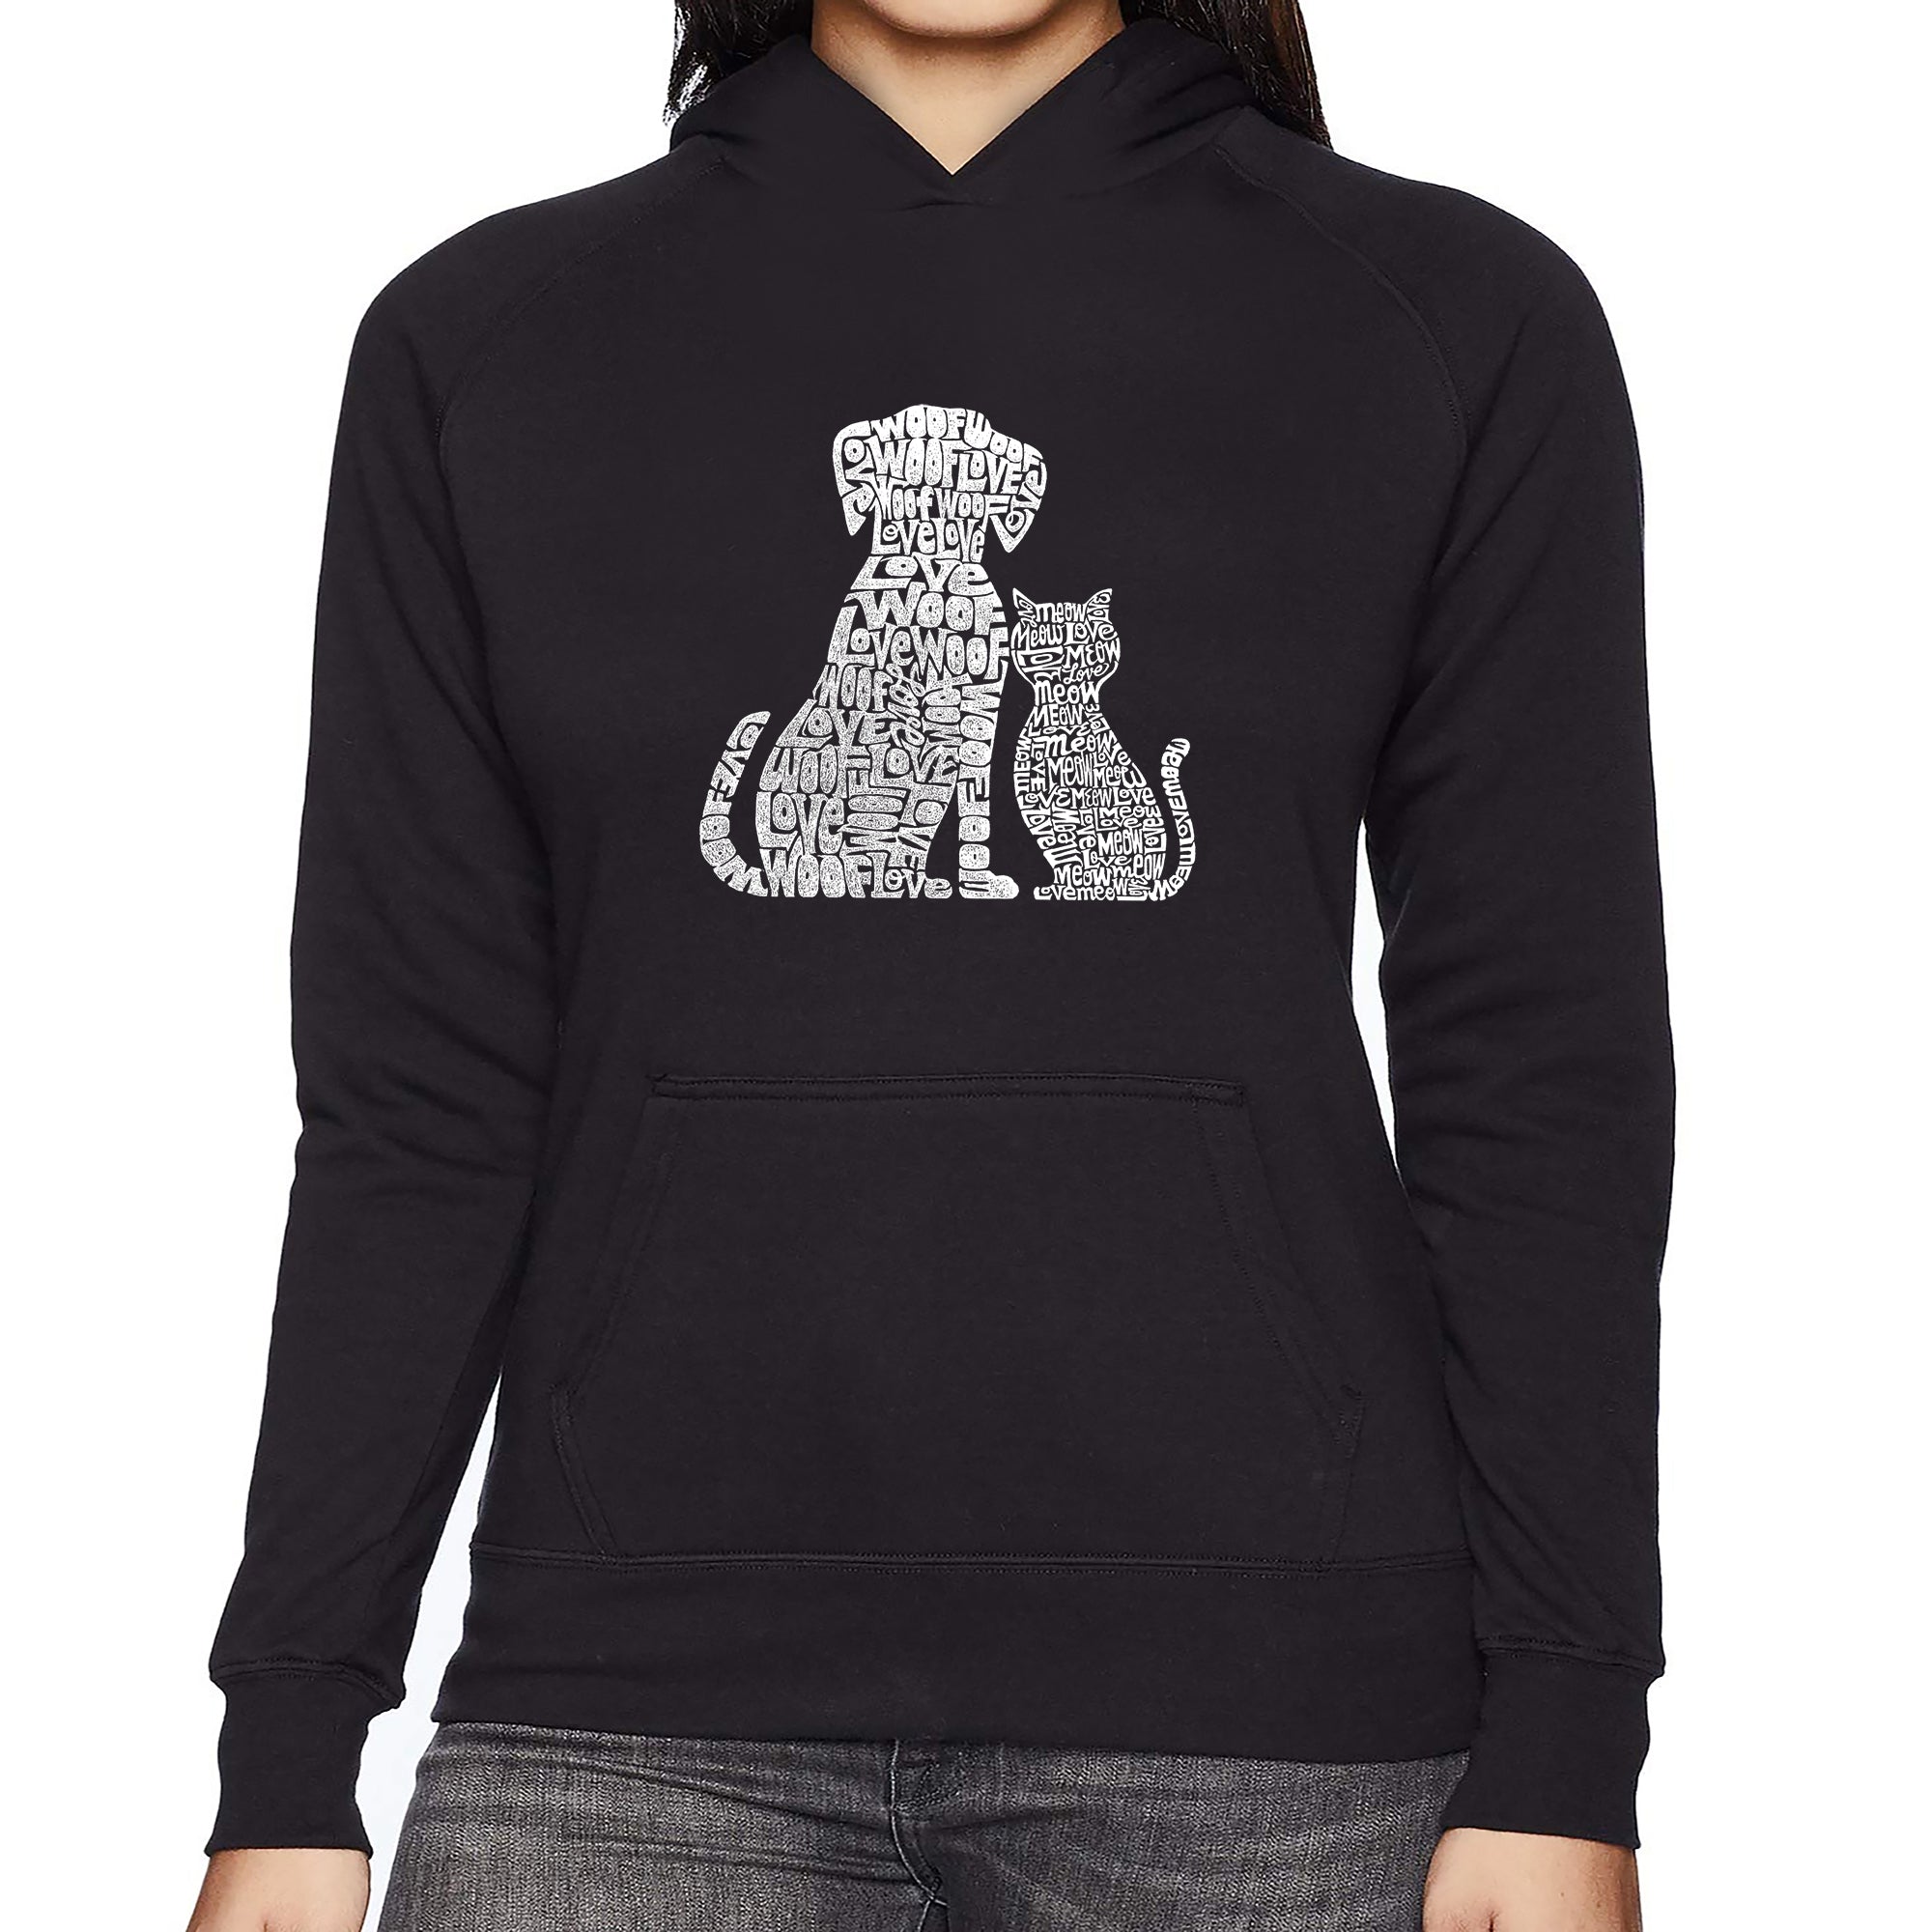 Dogs And Cats - Women's Word Art Hooded Sweatshirt - Black - XXX-Large